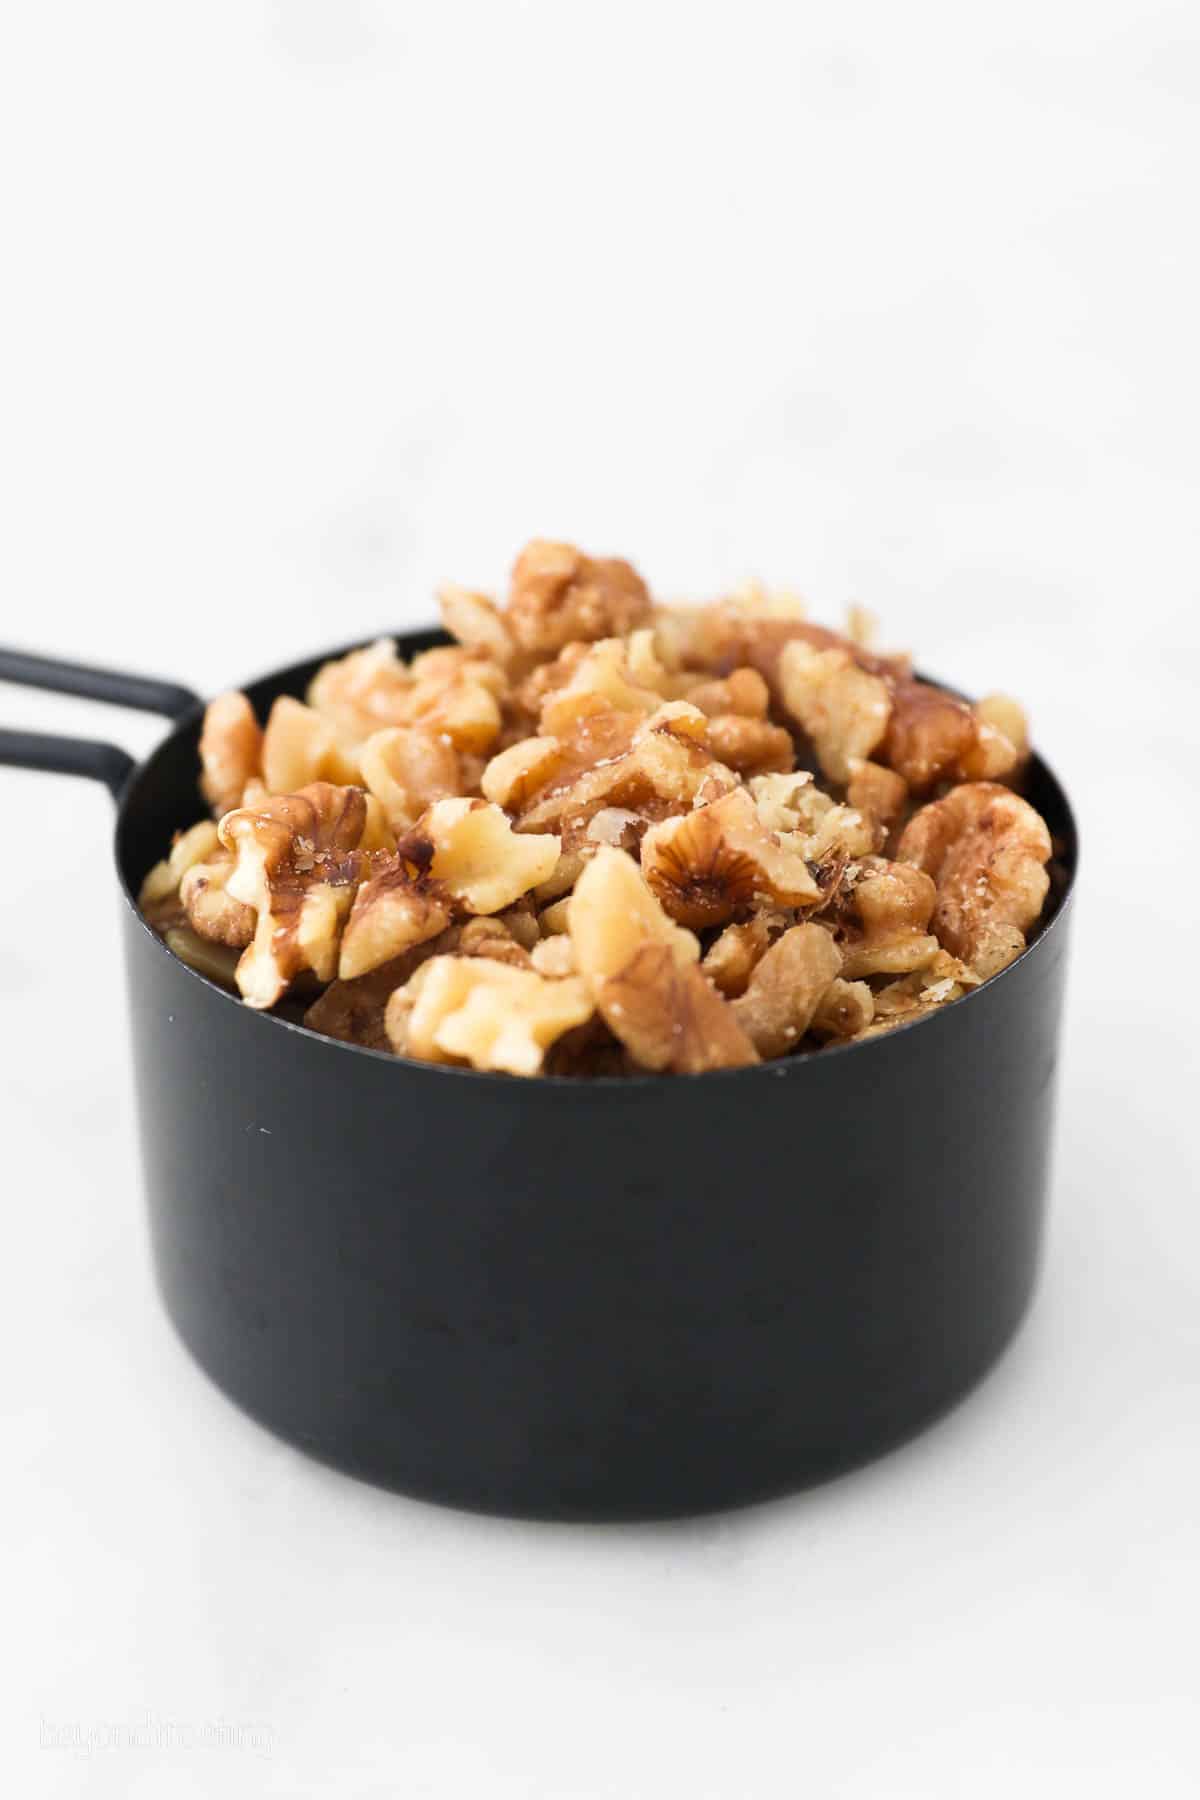 A black measuring cup filled with walnuts.